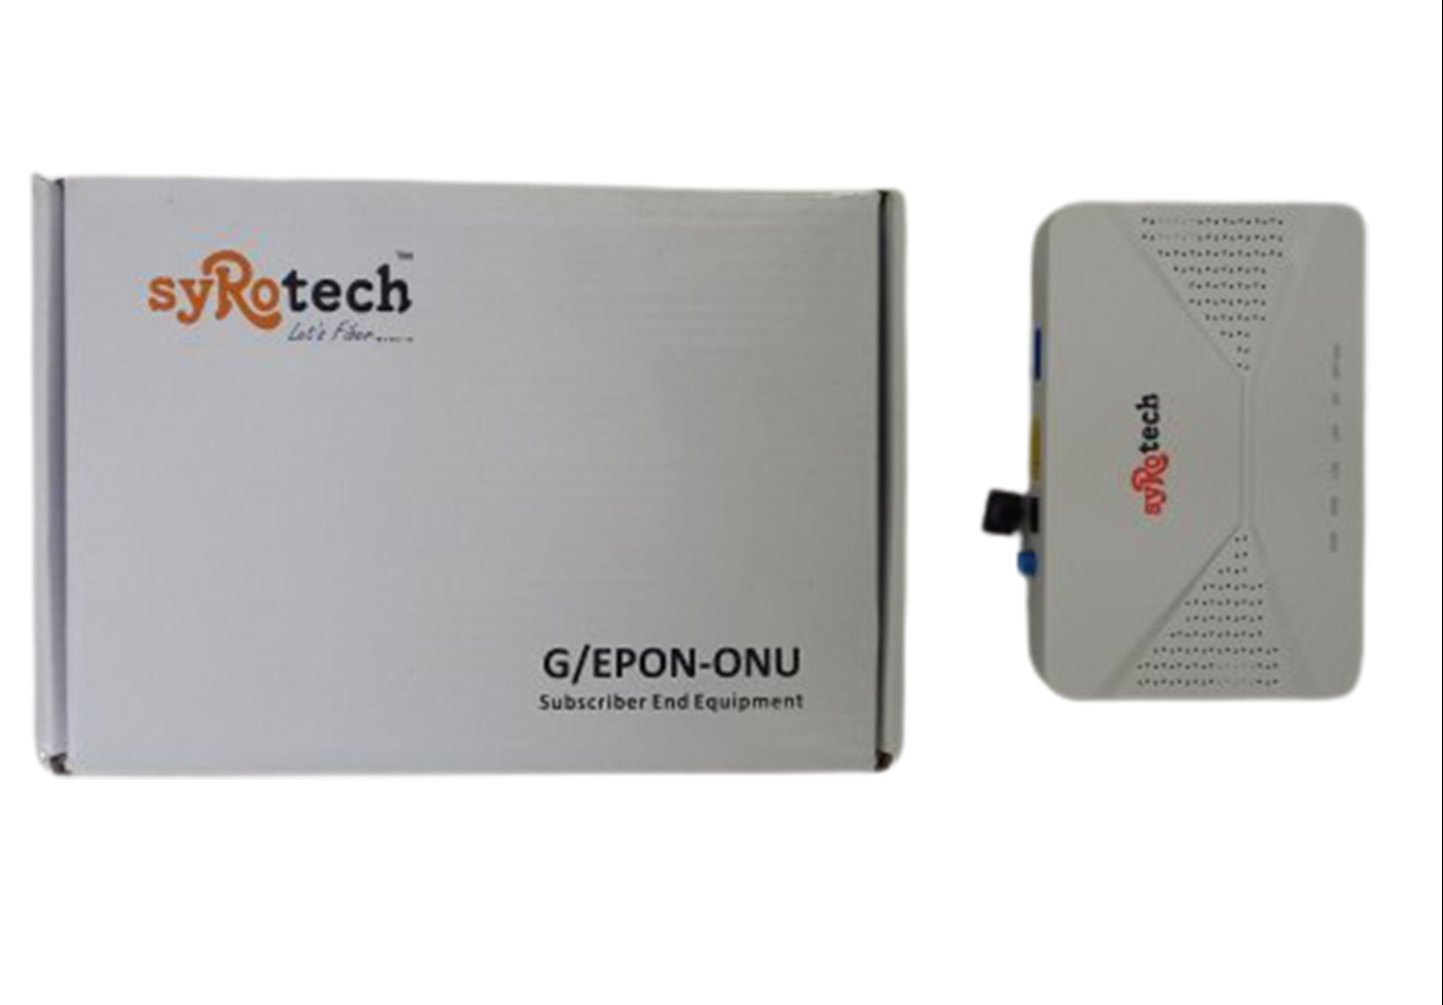 syrotech g/epon-onu-DS-syrotech g/epon-onu